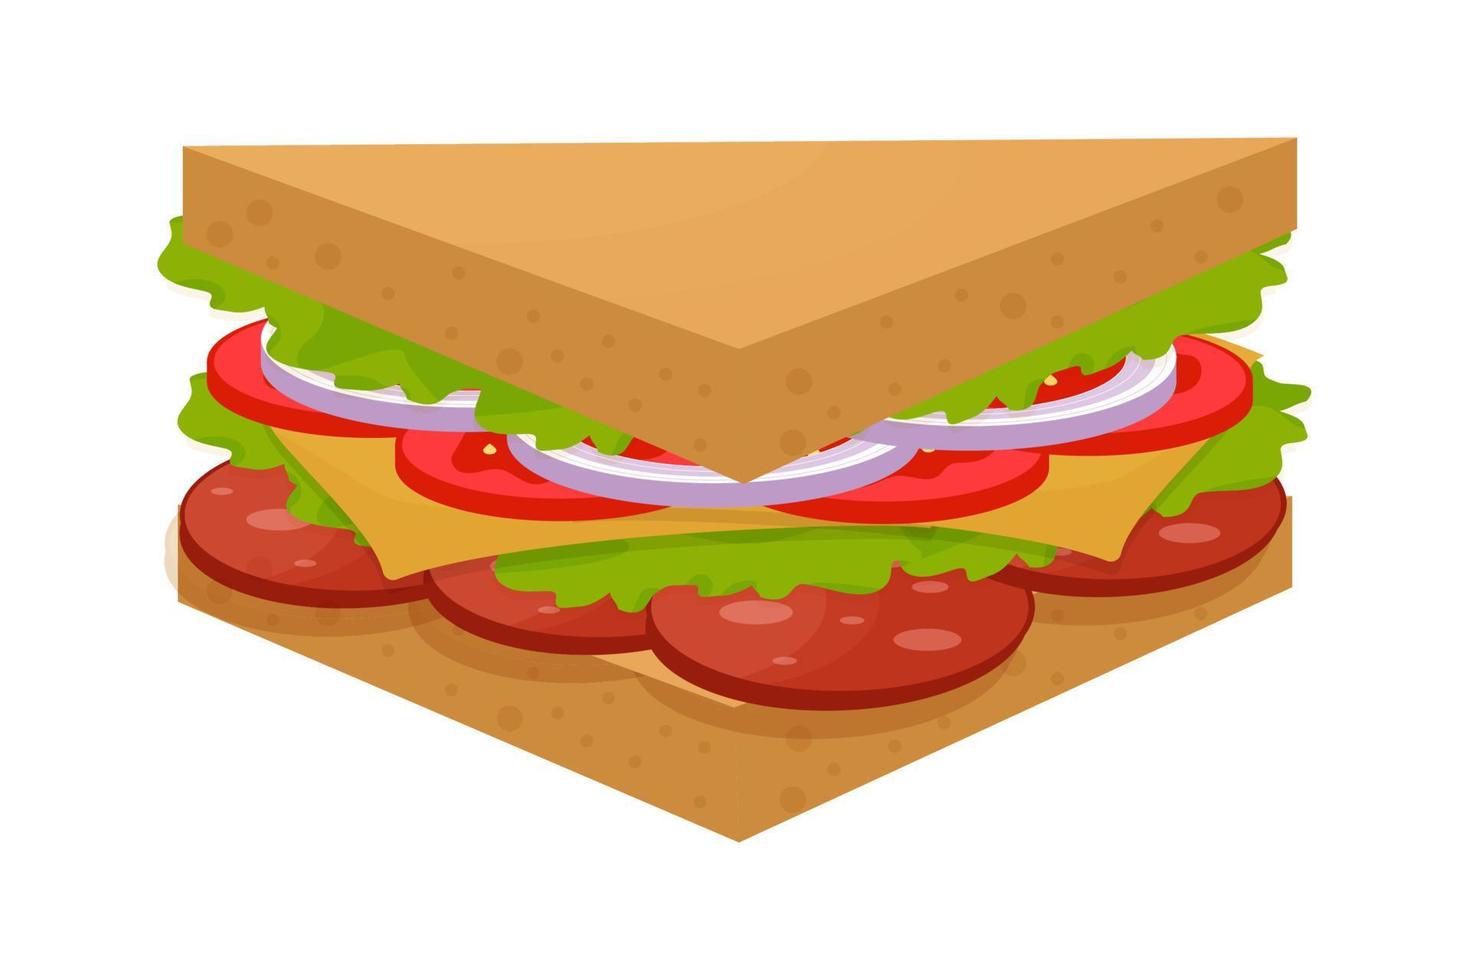 Tasty, delicious triangle sandwich, colorful and detailed isolated on white background. Salami, green leaves, tomato, cheese and onion ingredients. Vector illustration